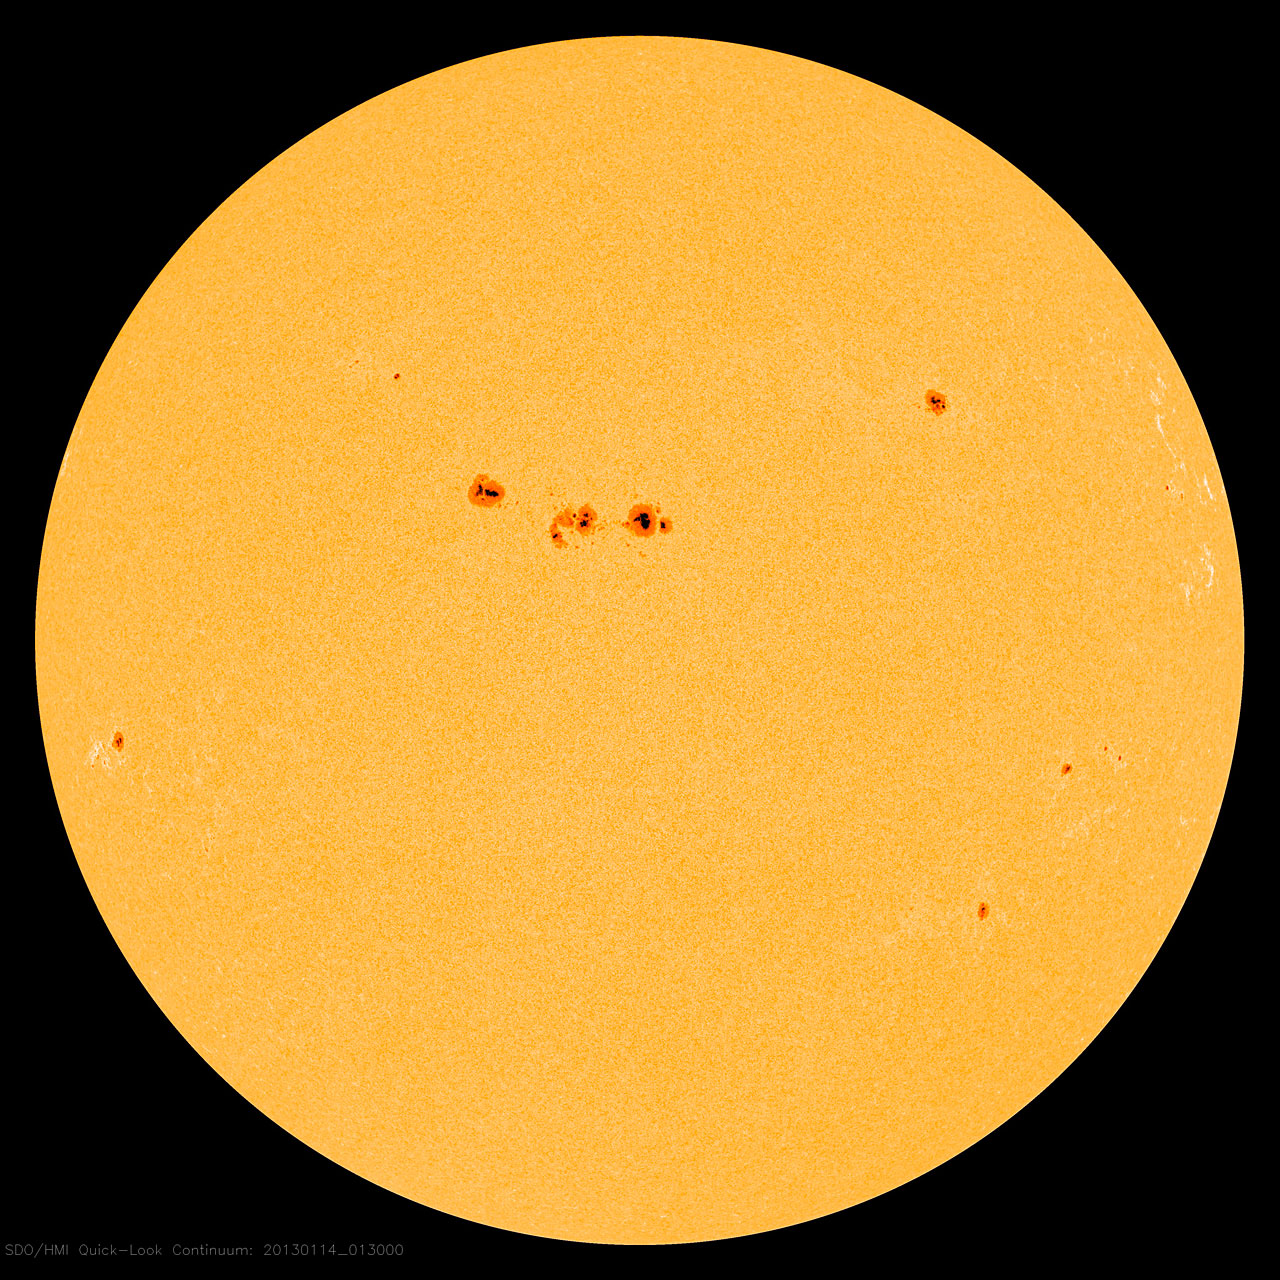 The Sun with sunspots